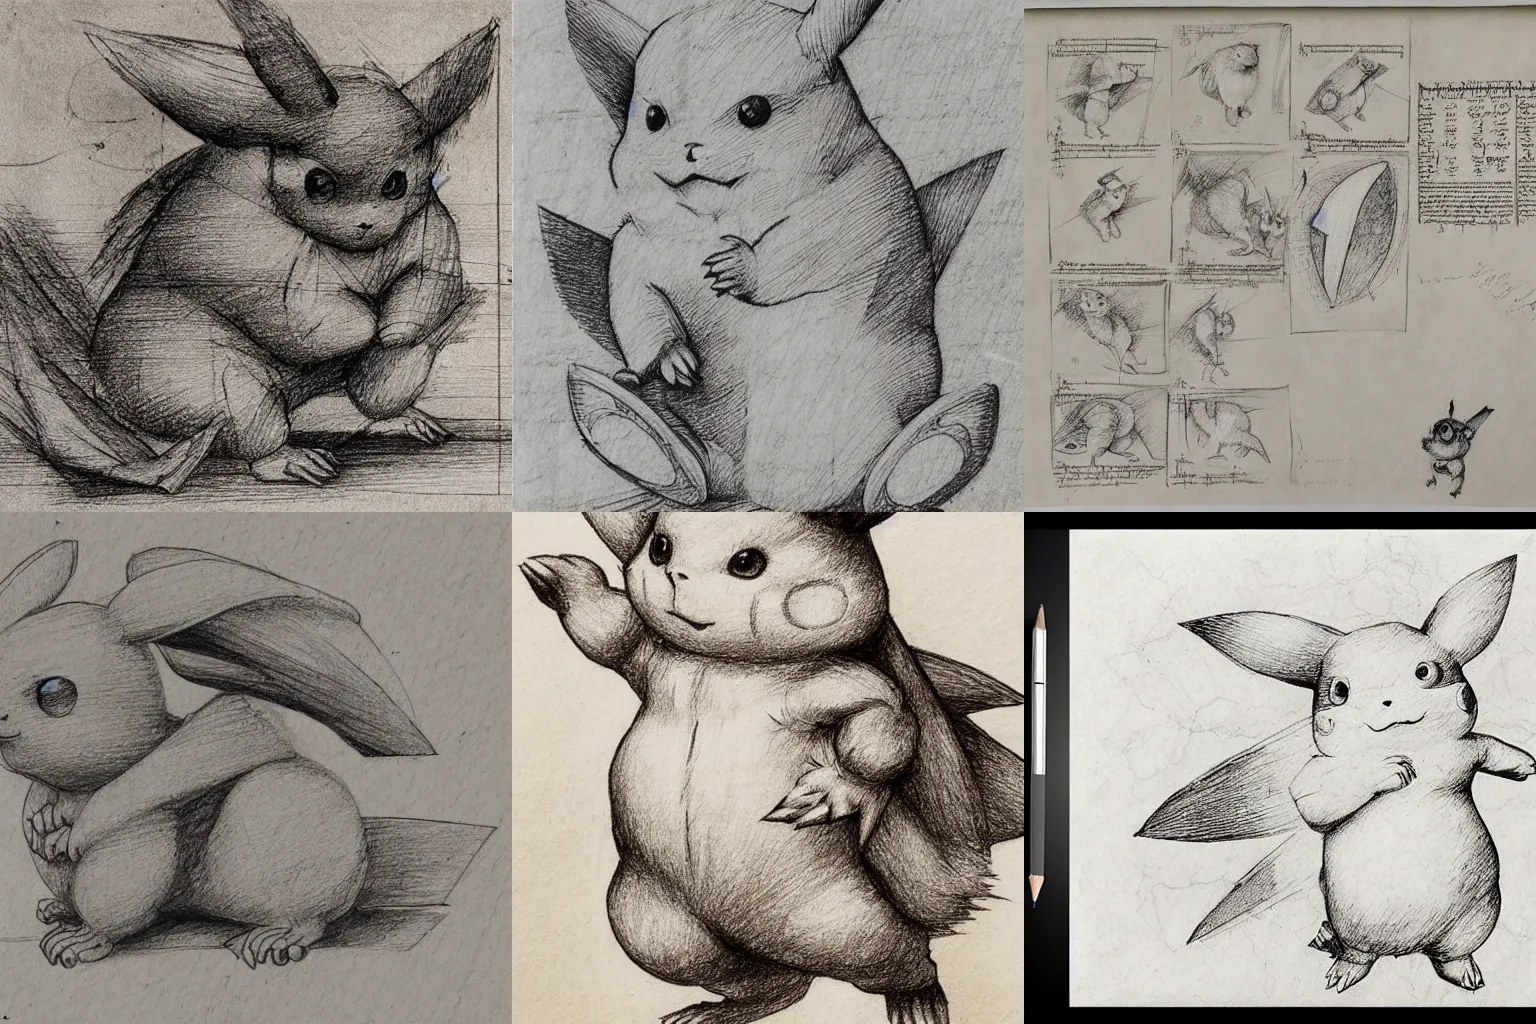 Prompt: leonardo da vinci intricate full page scan of study sheet of drawings of pikachu animal, on grey paper sketch ink style, detailed